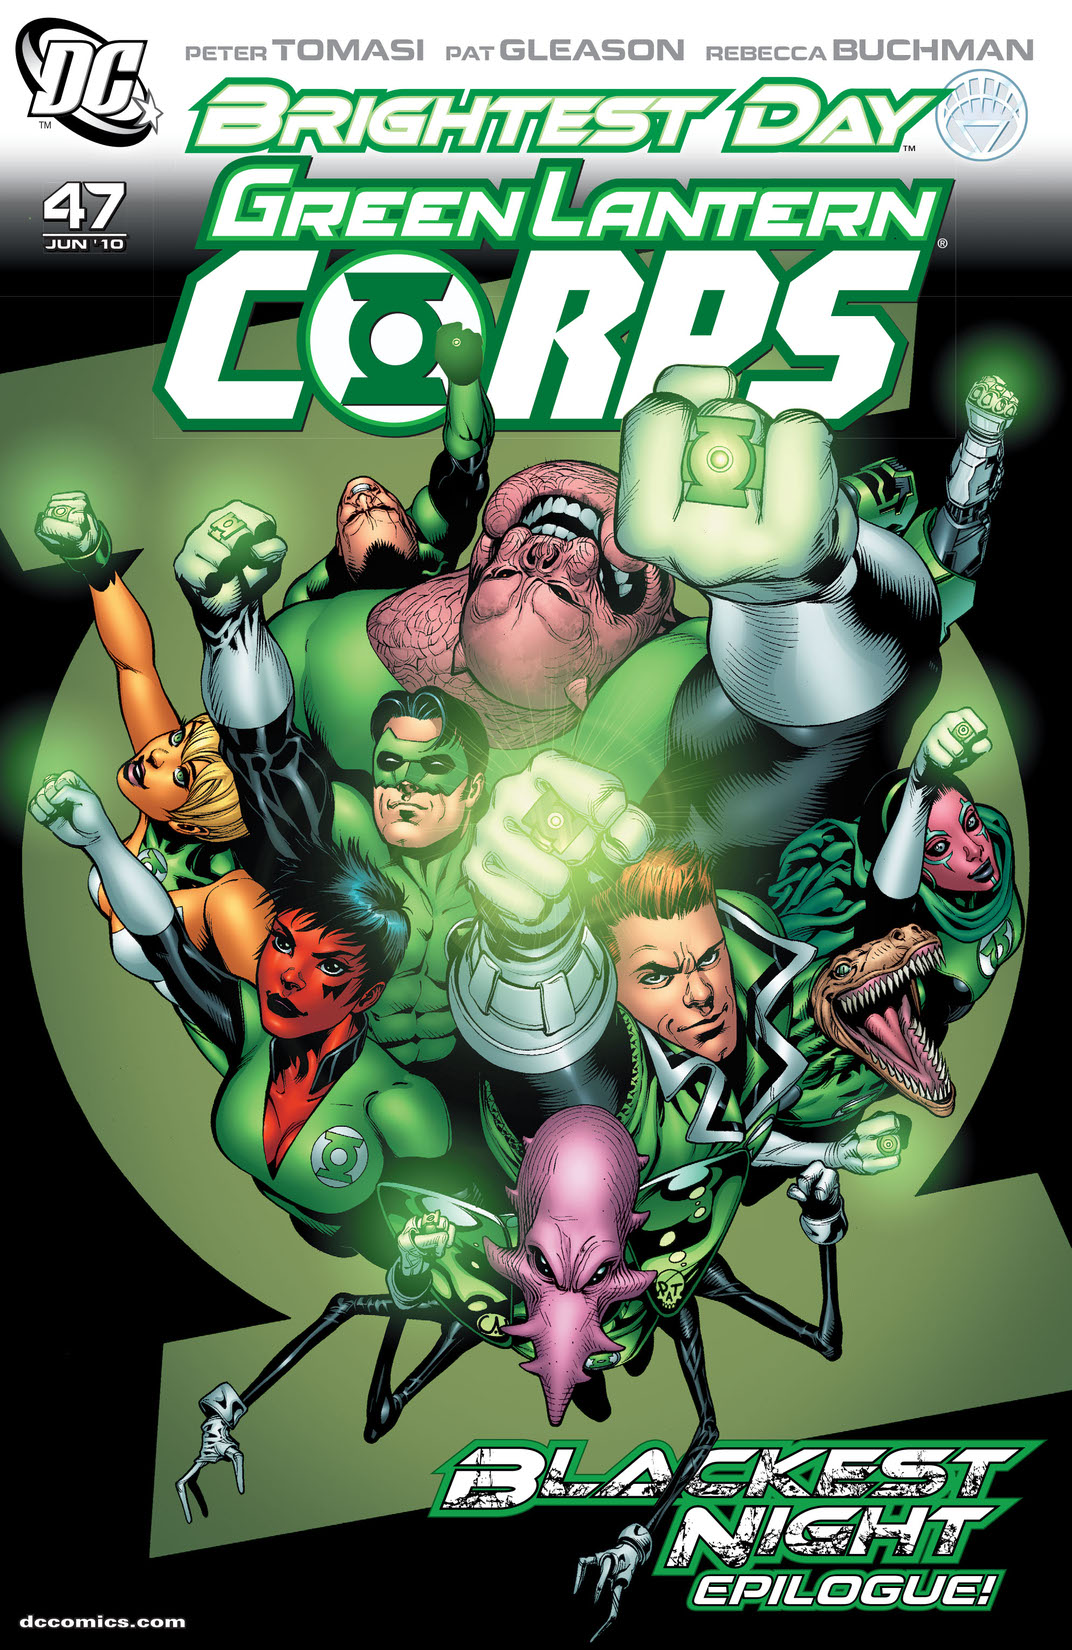 Green Lantern Corps (2006-) #47 preview images